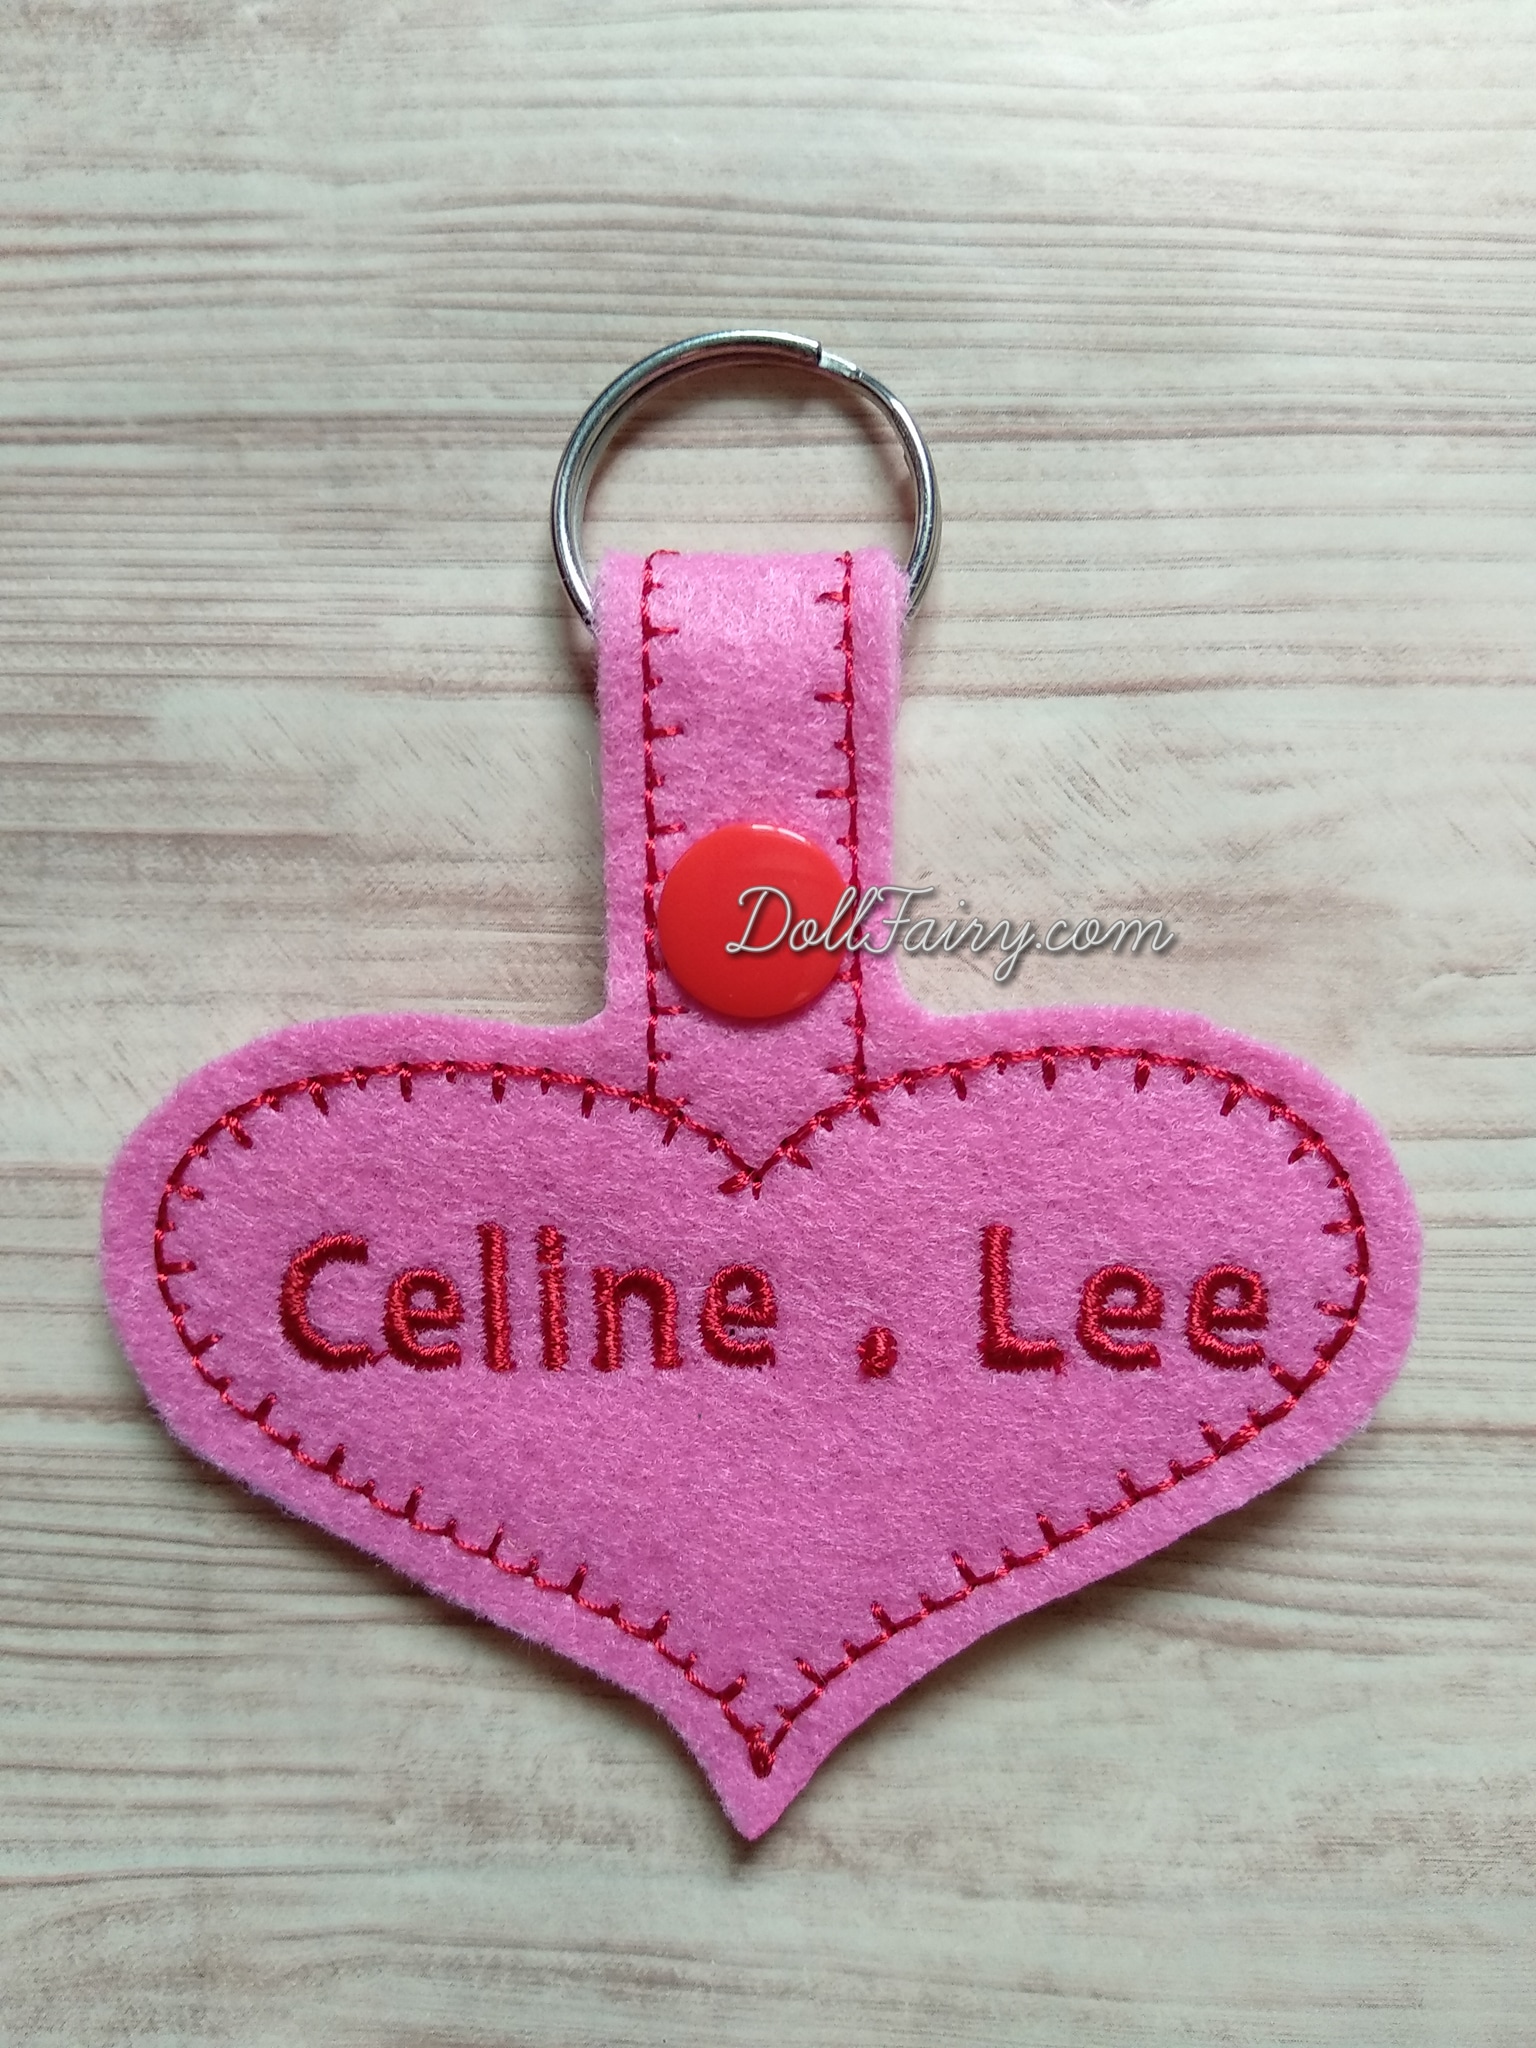 A pink heart shaped key fob for a sweet girl.